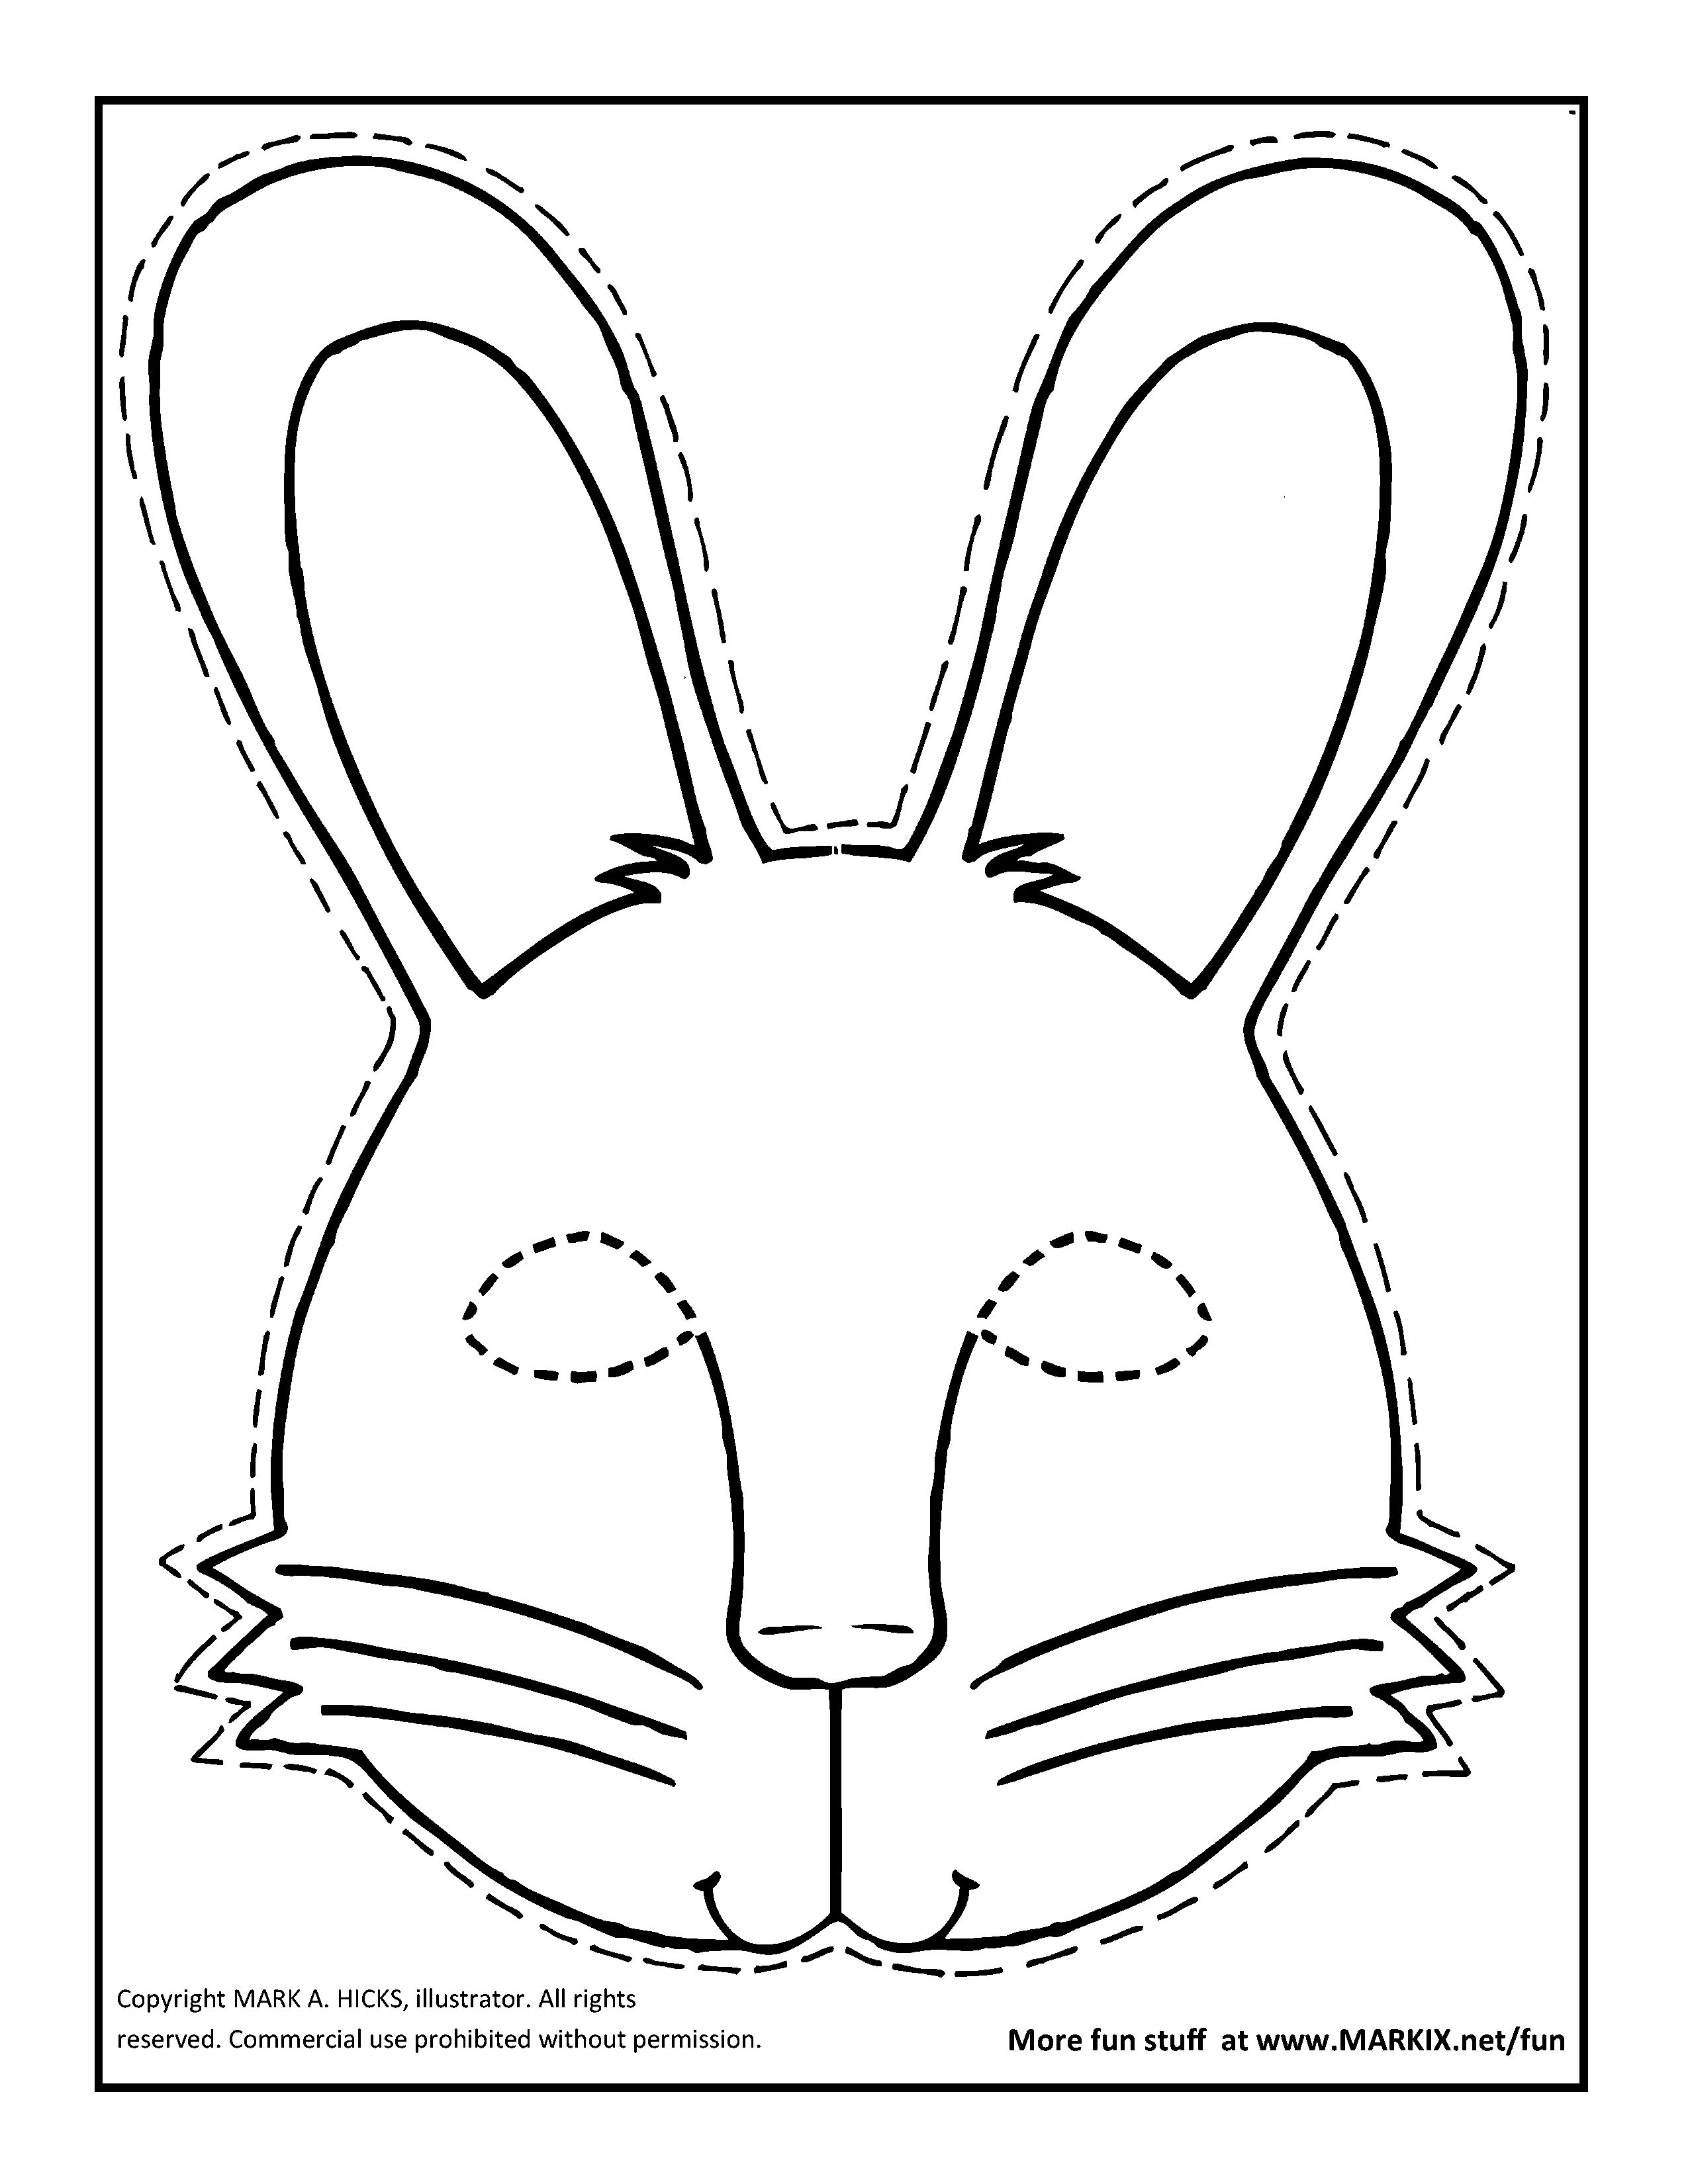 soulmuseumblog-bunny-cut-out-coloring-pages